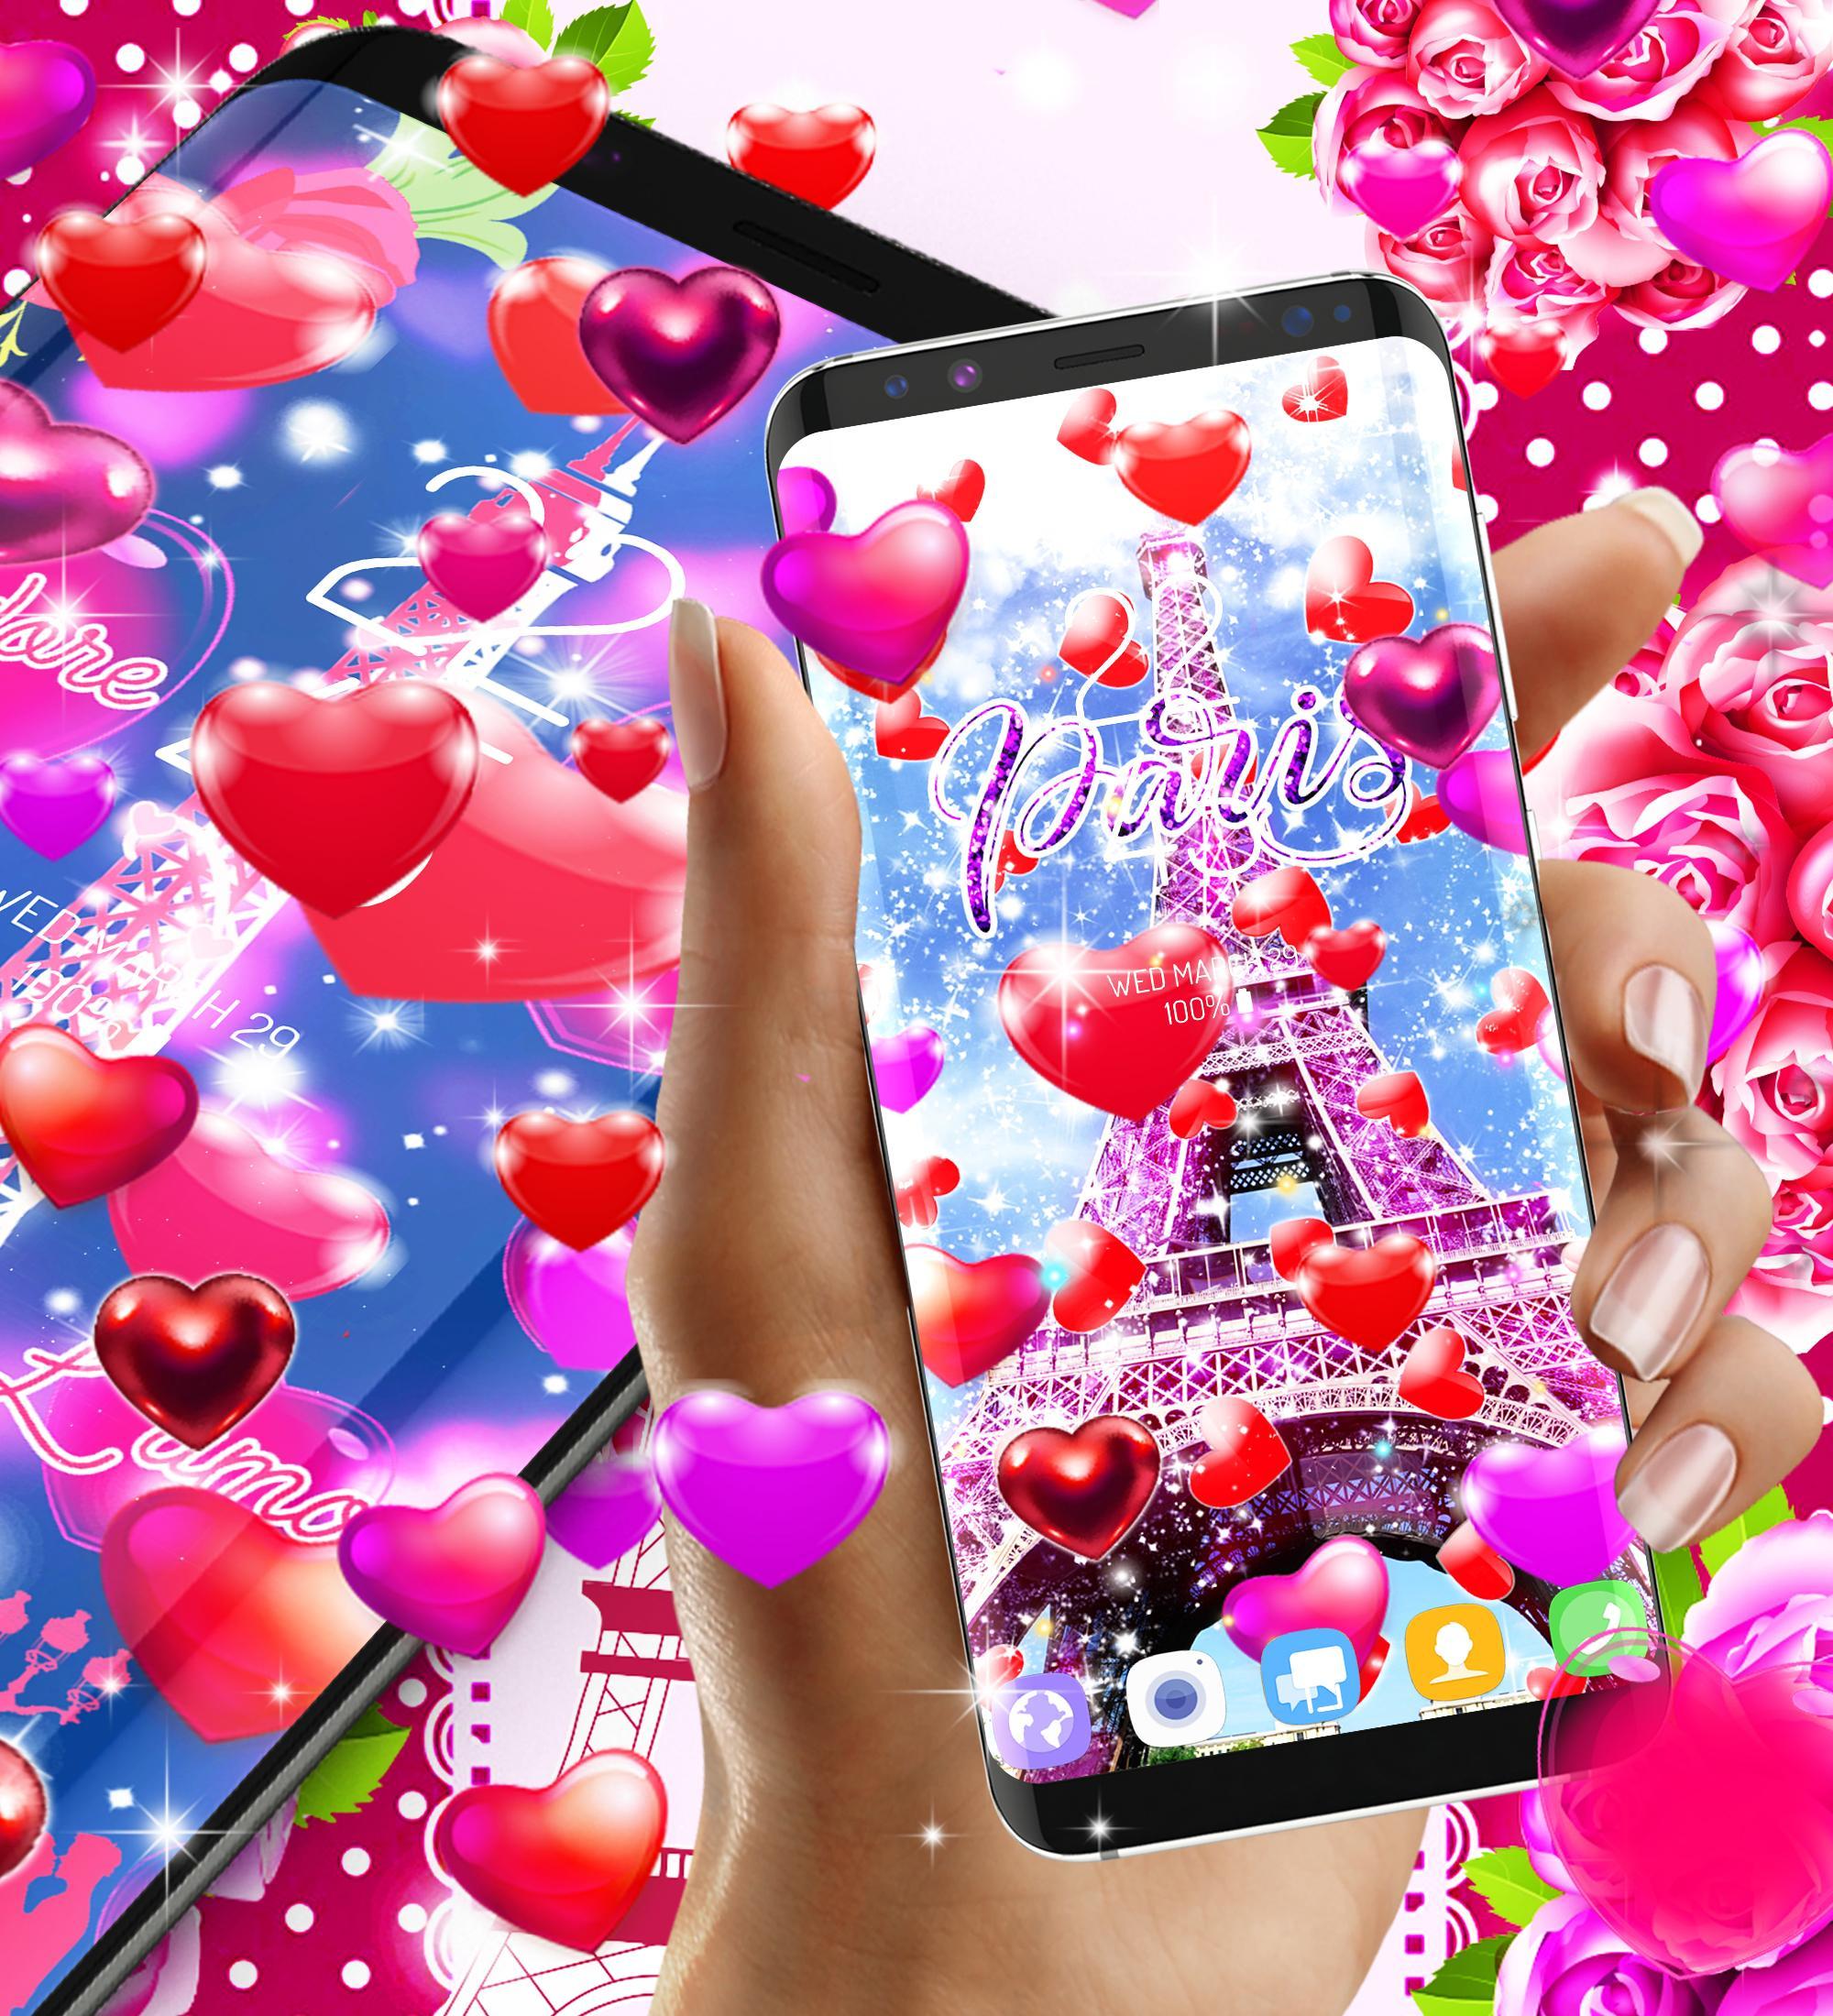 New paris love live wallpaper for Android